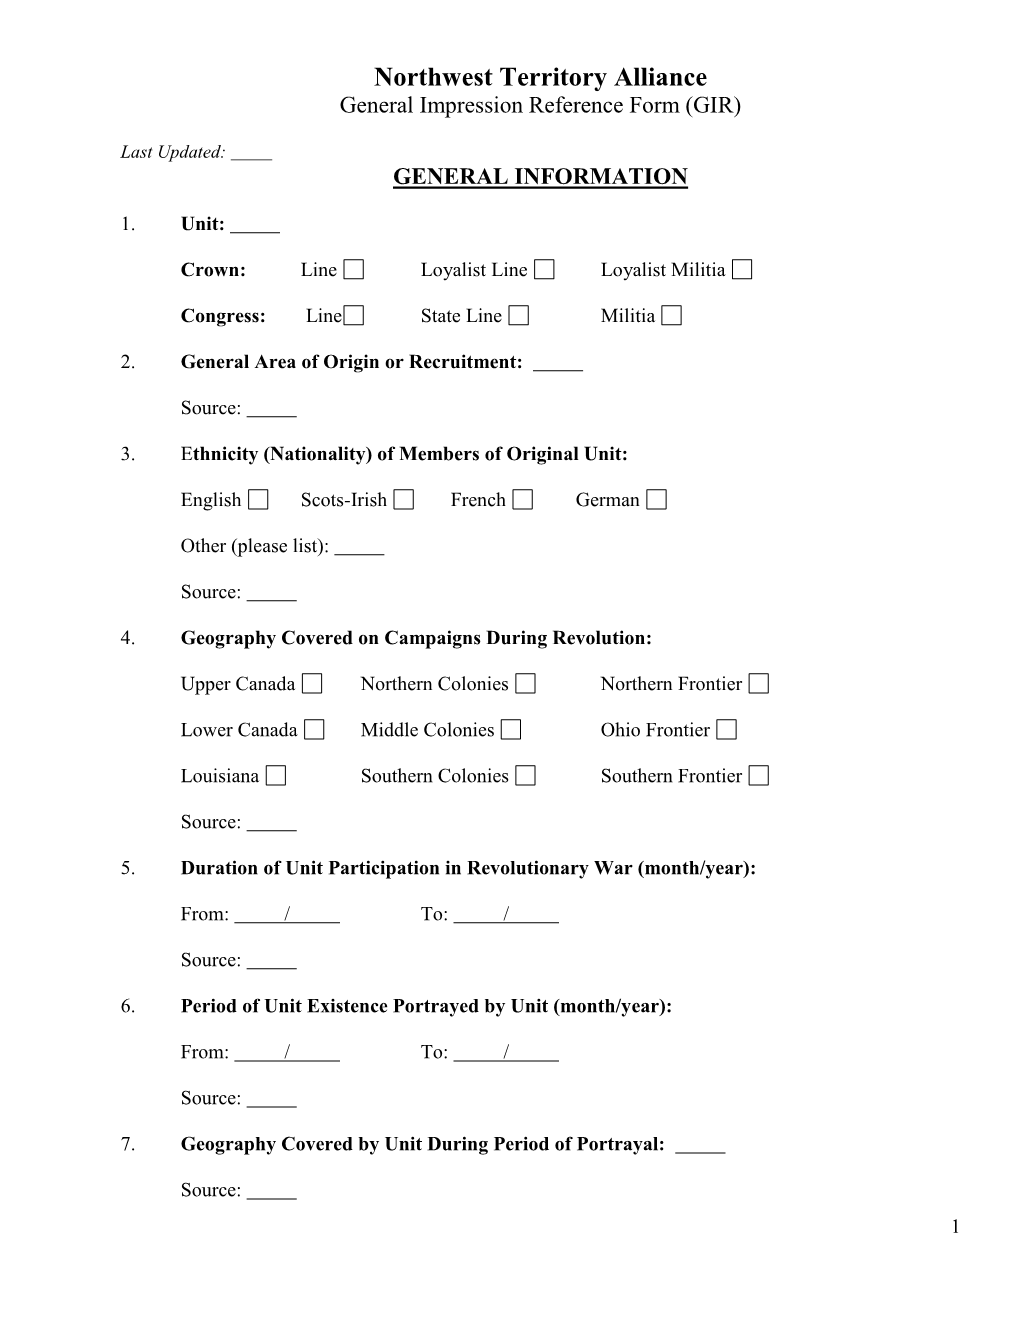 Northwest Territory Alliance General Impression Reference Form (GIR)